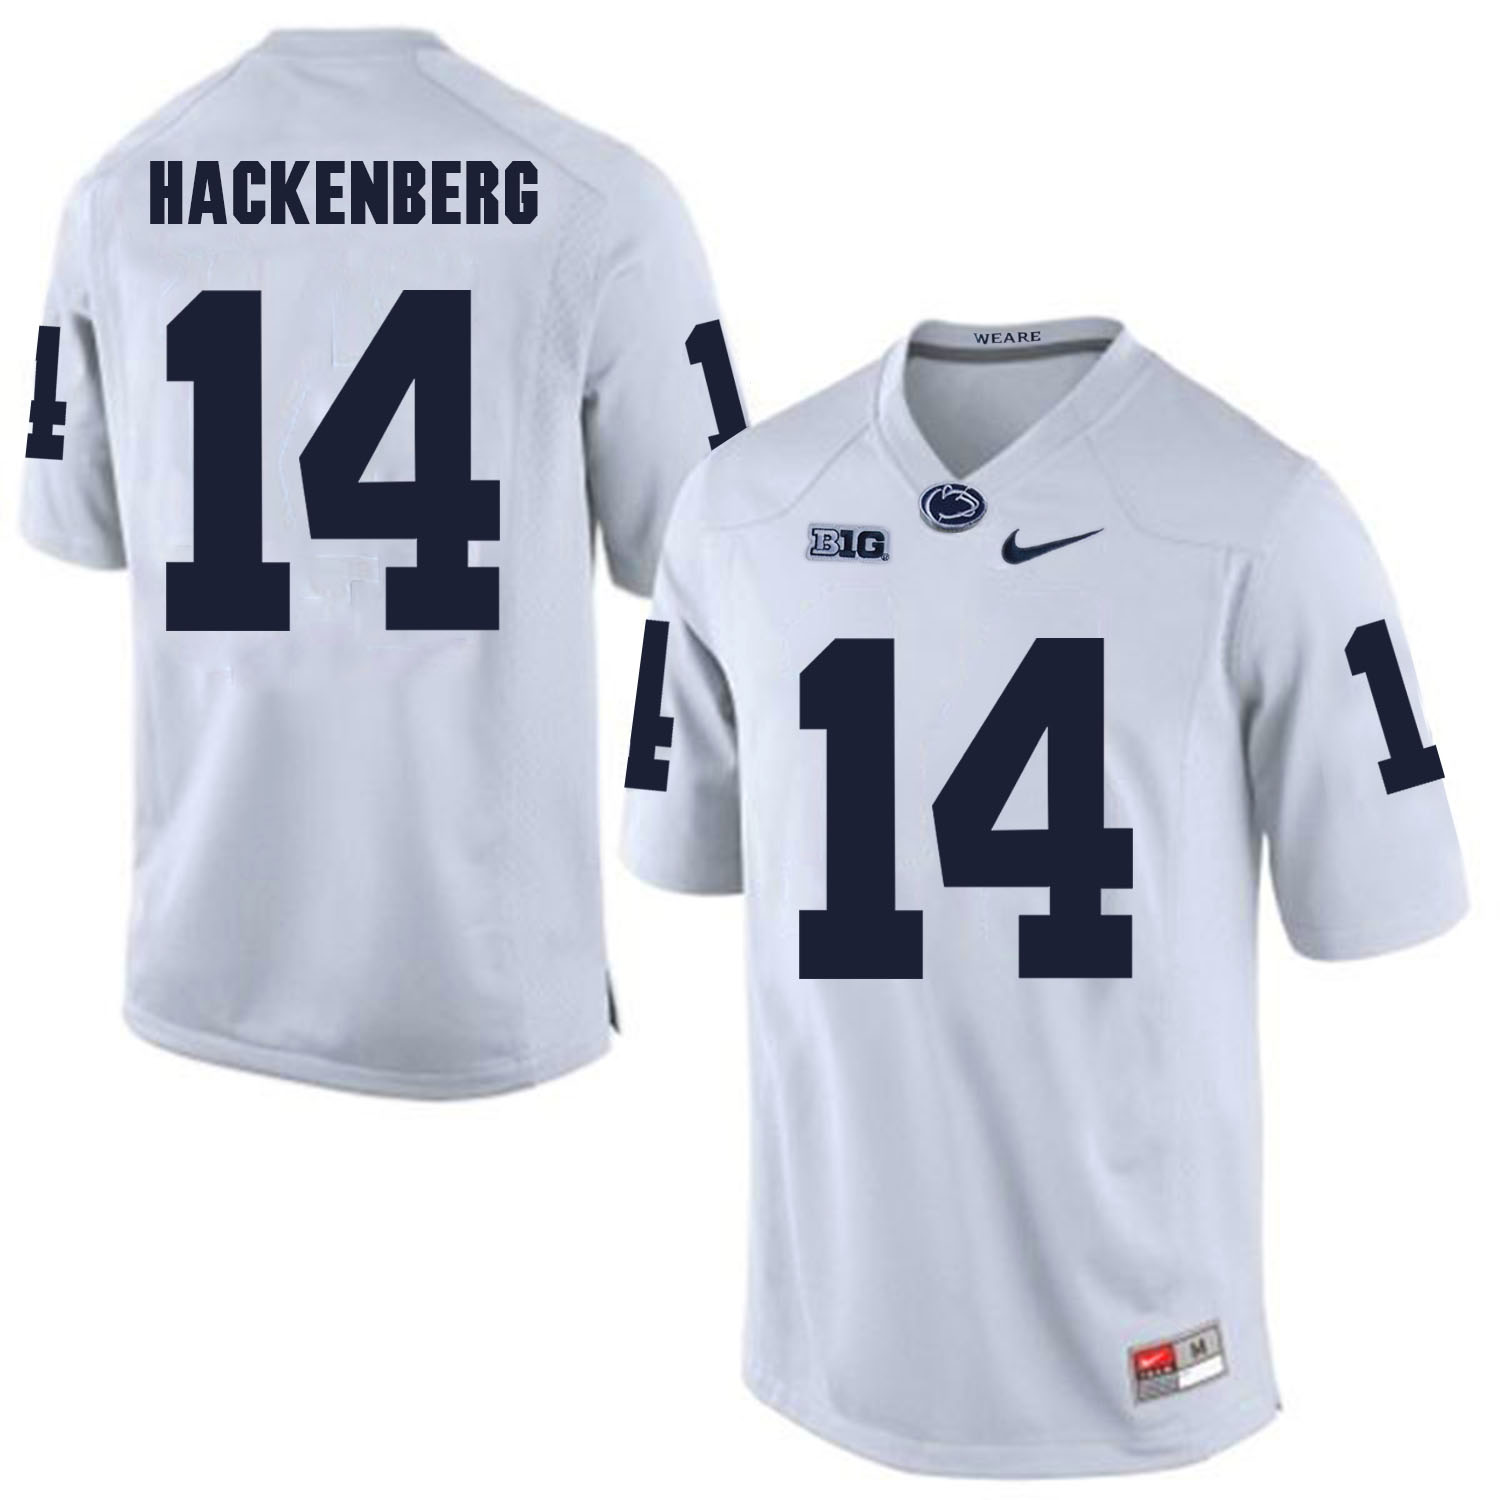 Penn State Nittany Lions 14 Christian Hackenberg White College Football Jersey